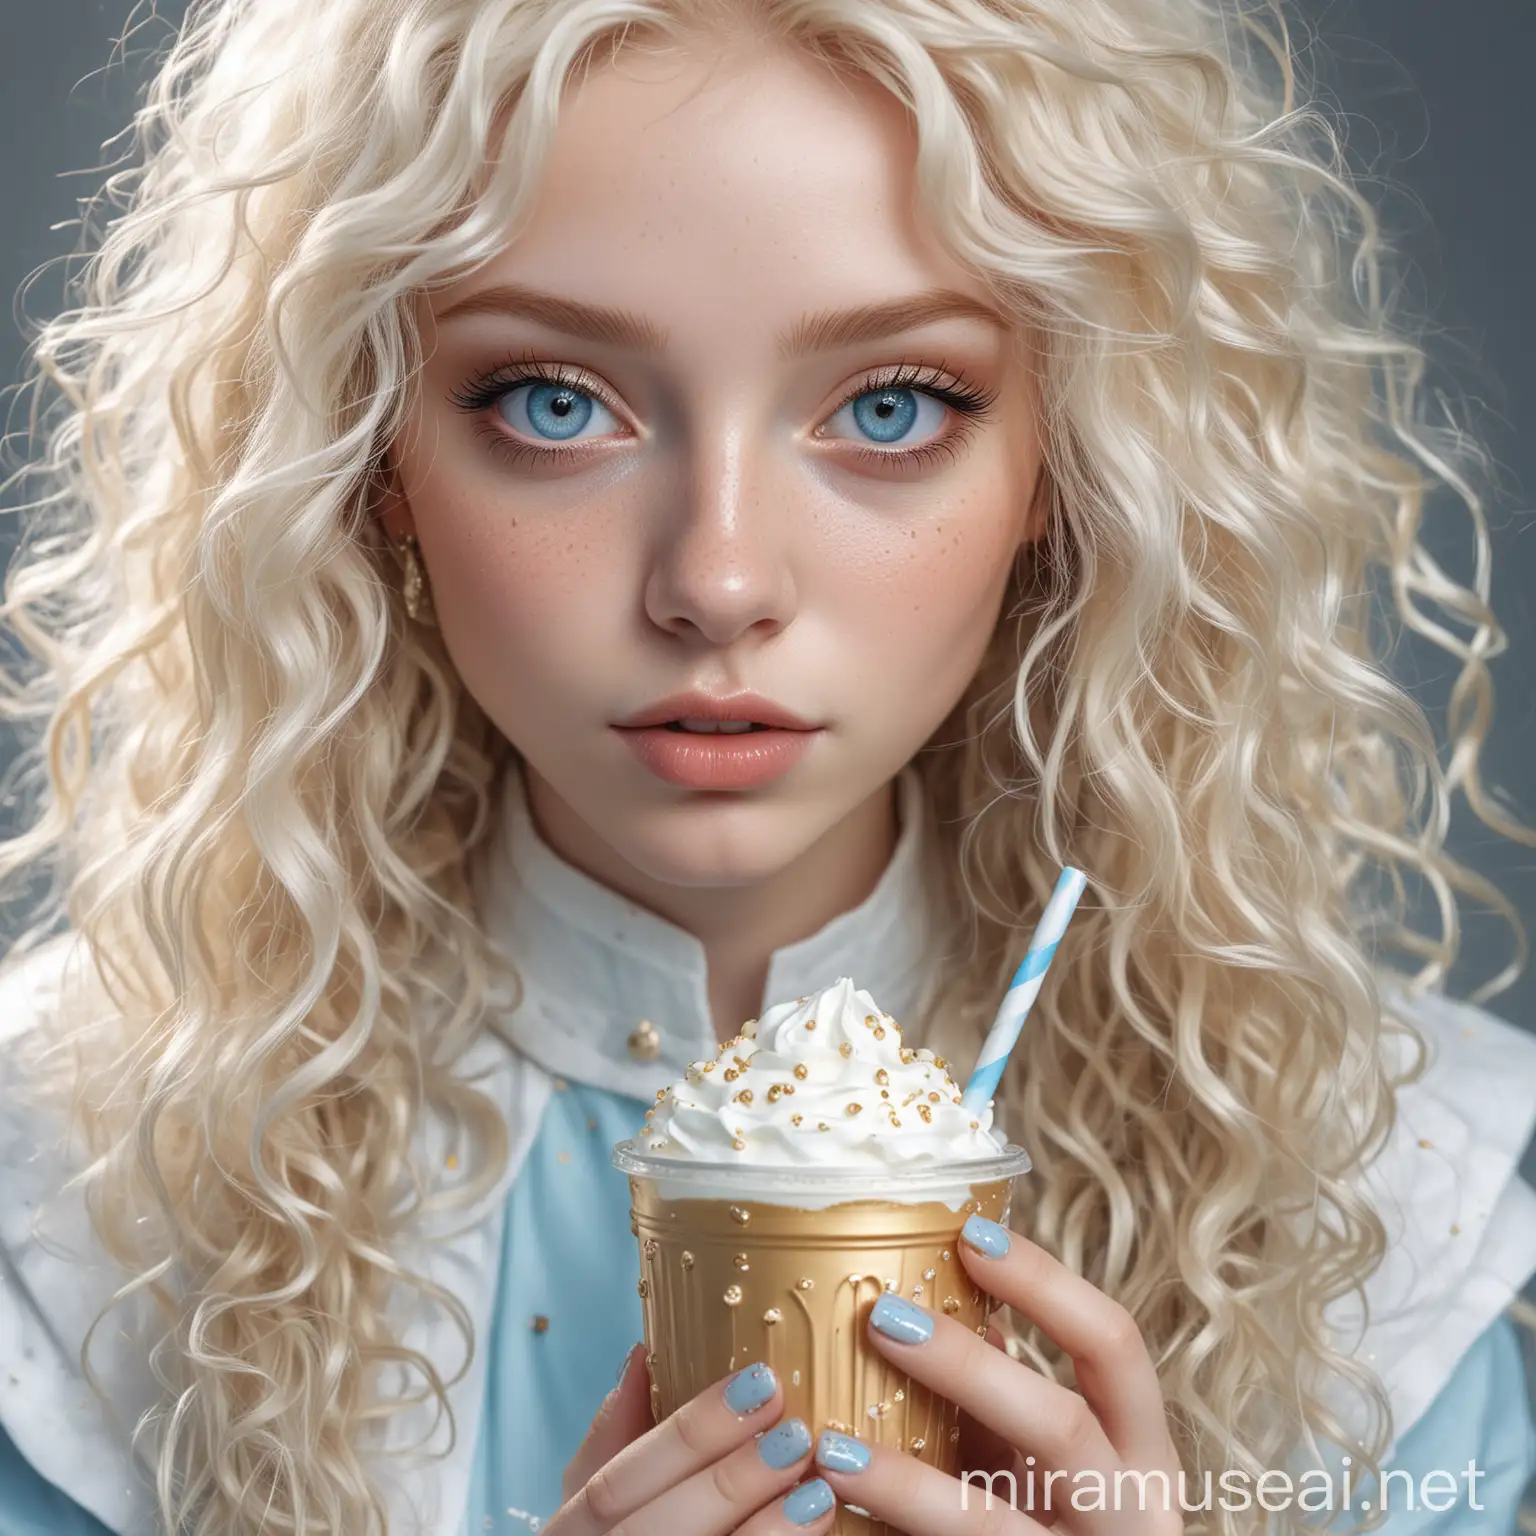 good quality picture, detailed eyes, albino girl, freckles, with golden spots on the body, wearning DUNE style clothes, hyper realistic, beautiful curly long hair, inside a white starship, elf ears, soft blue eyes, holding a light blue milkshake glass, nails painted light blue, several rings on fingers